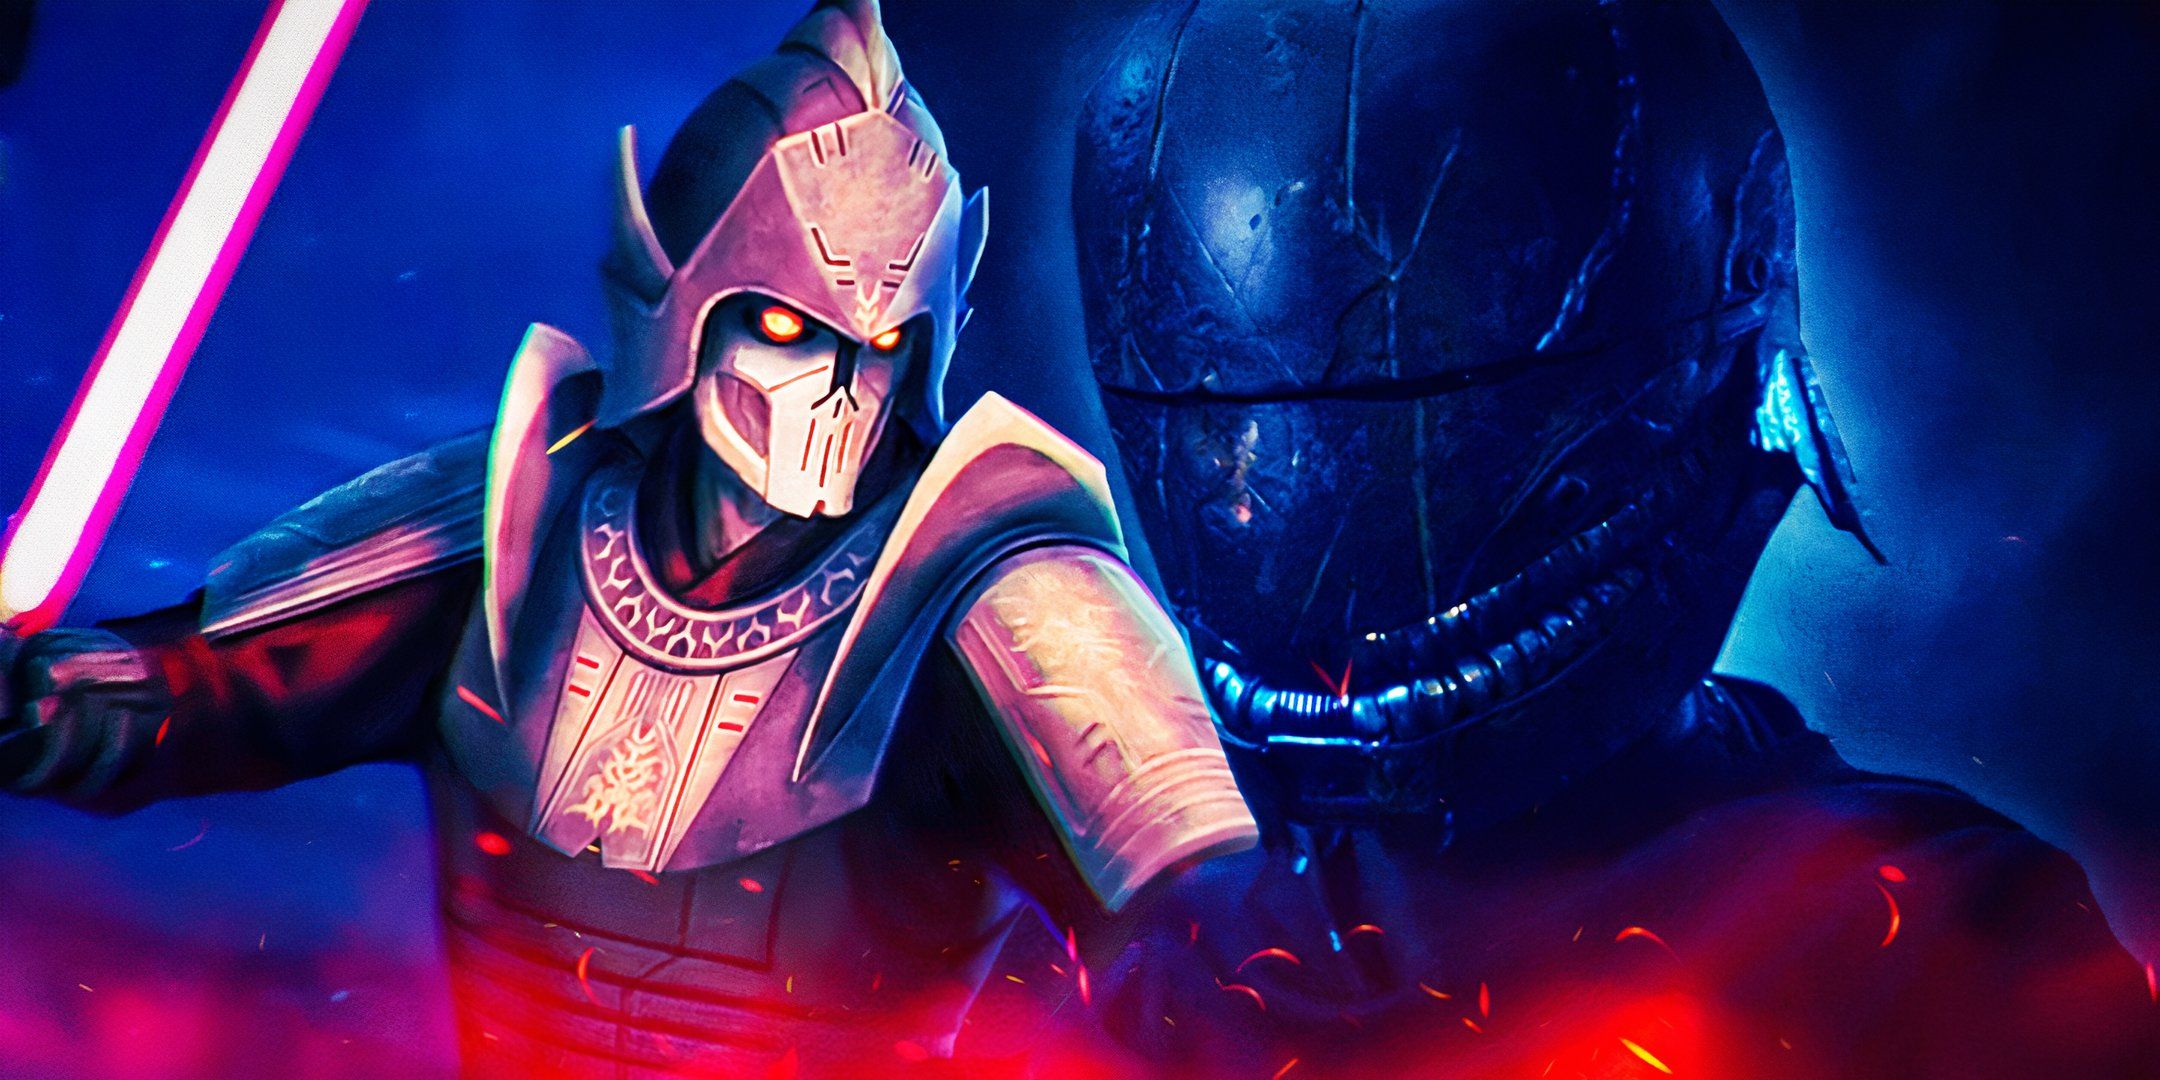 An illustration of Darth Bane, edited over The Stranger in The Acolyte